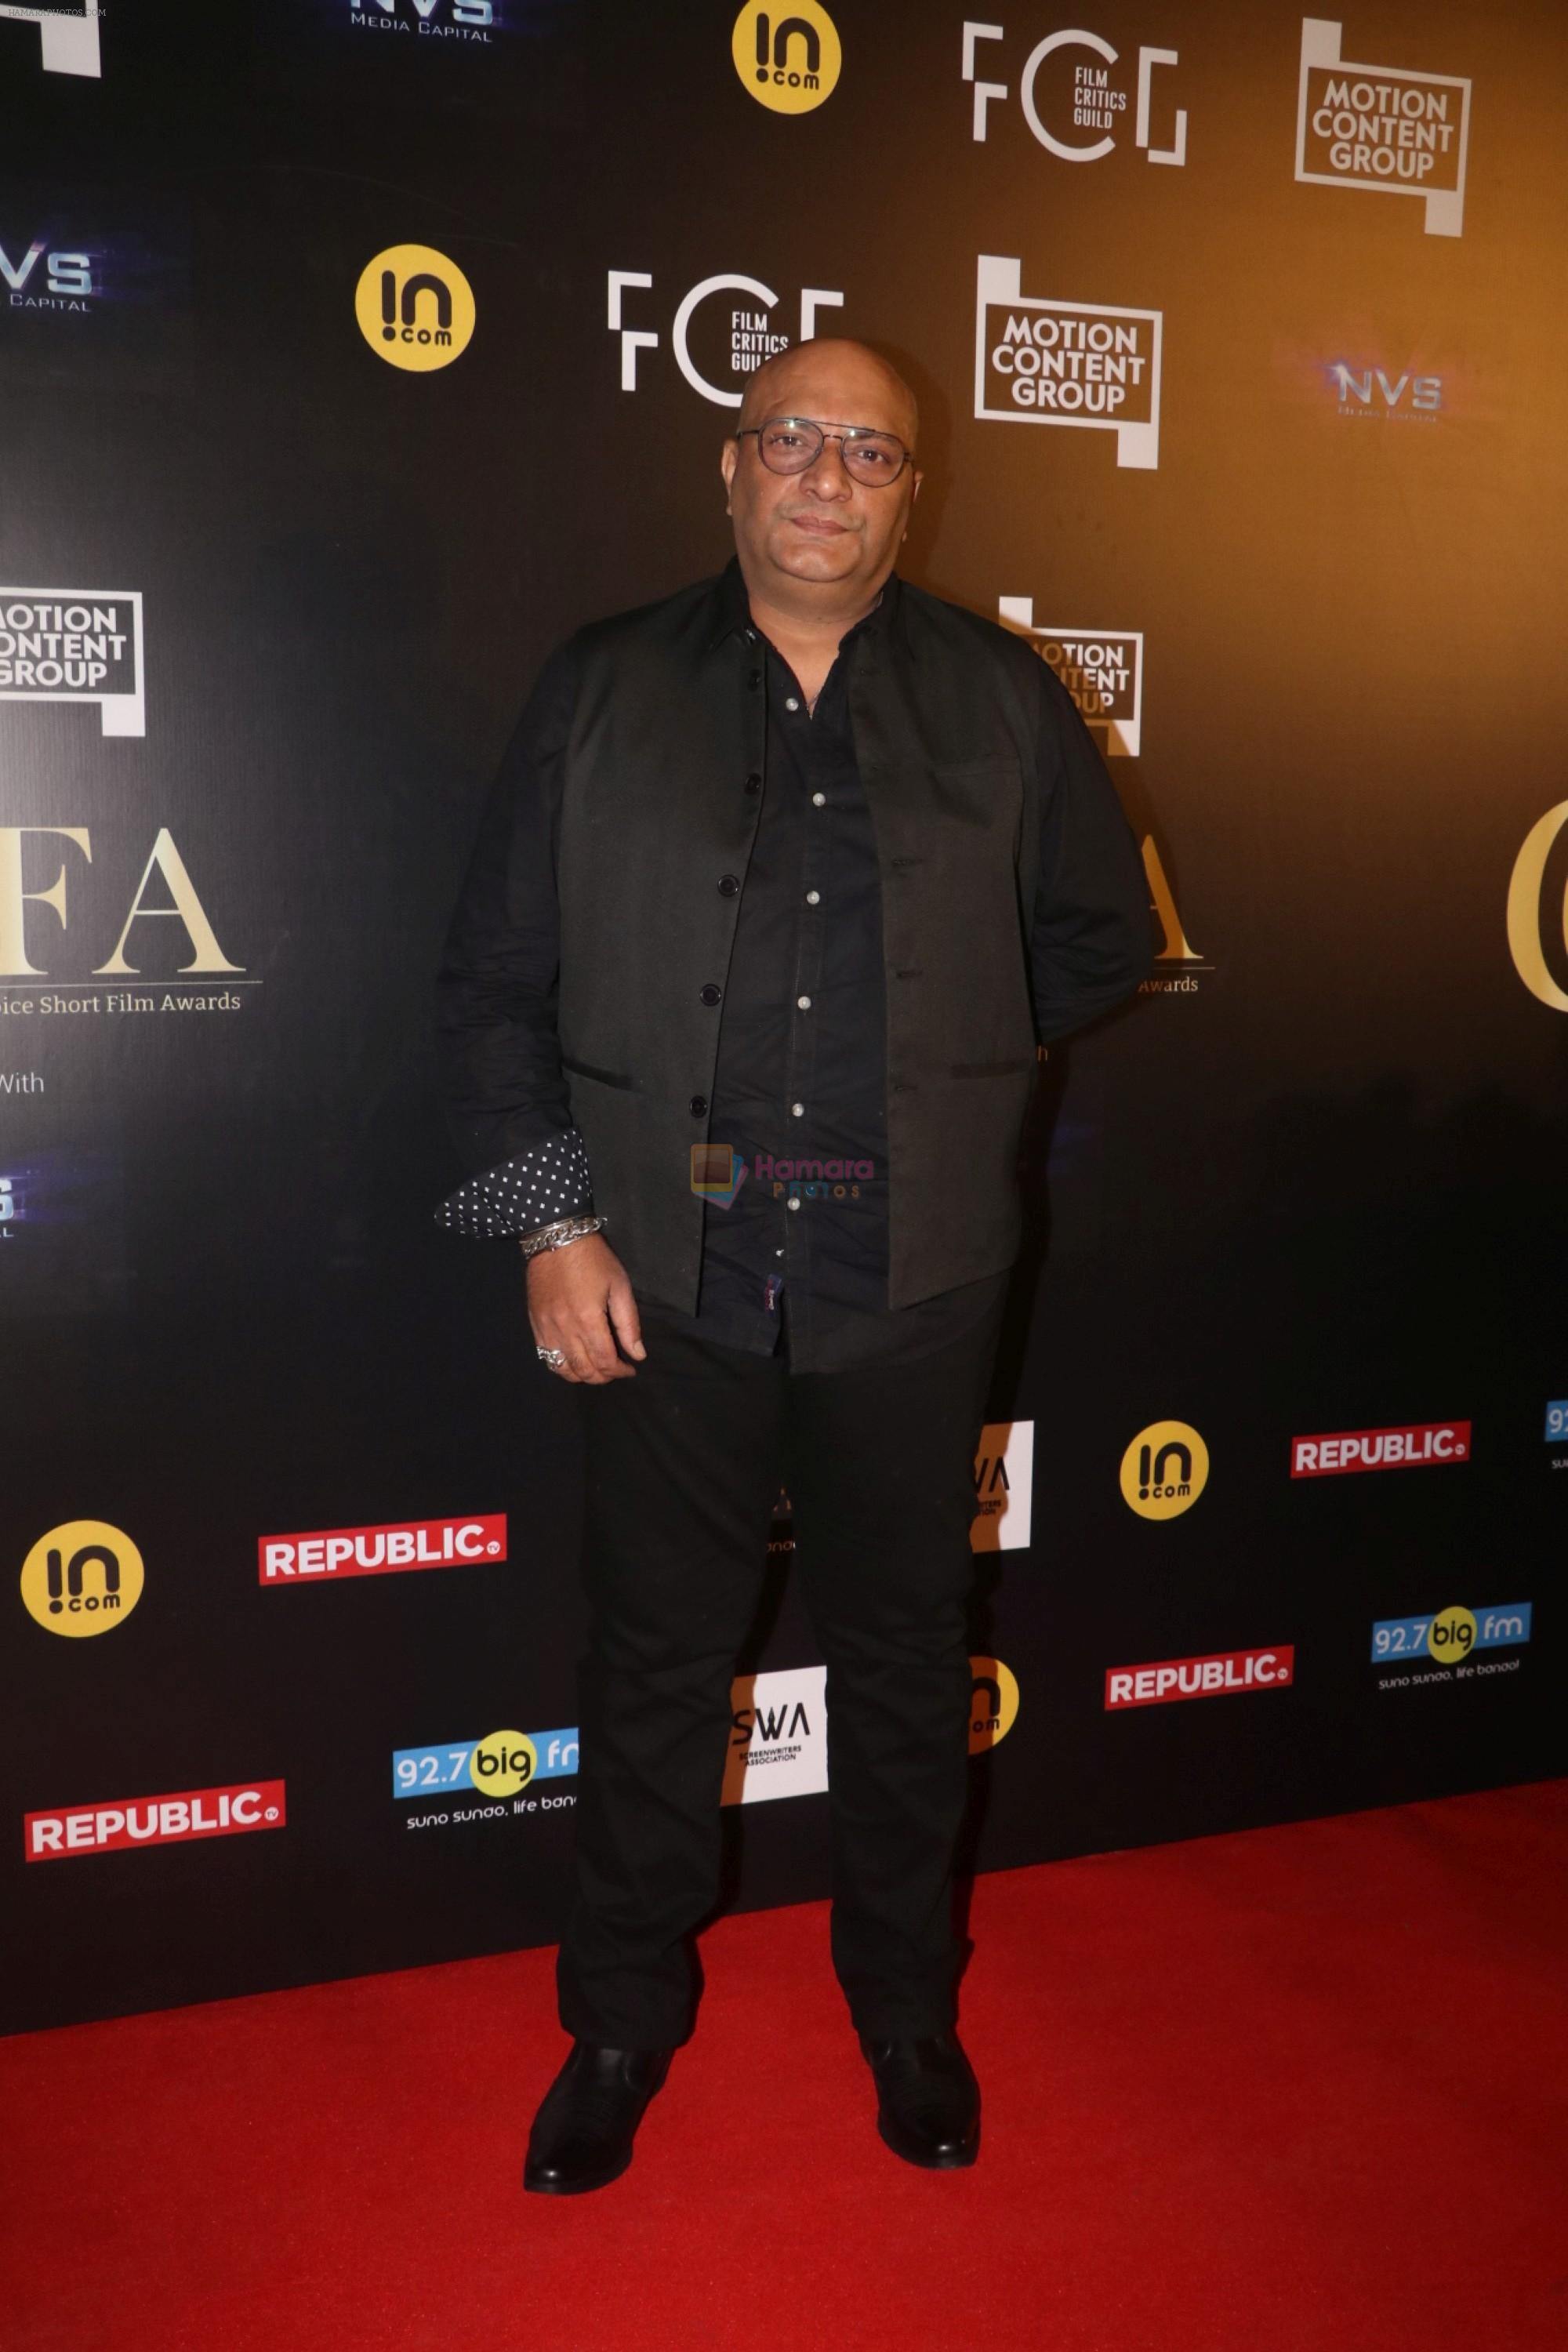 at the Red carpet of critics choice short film awards on 15th Dec 2018